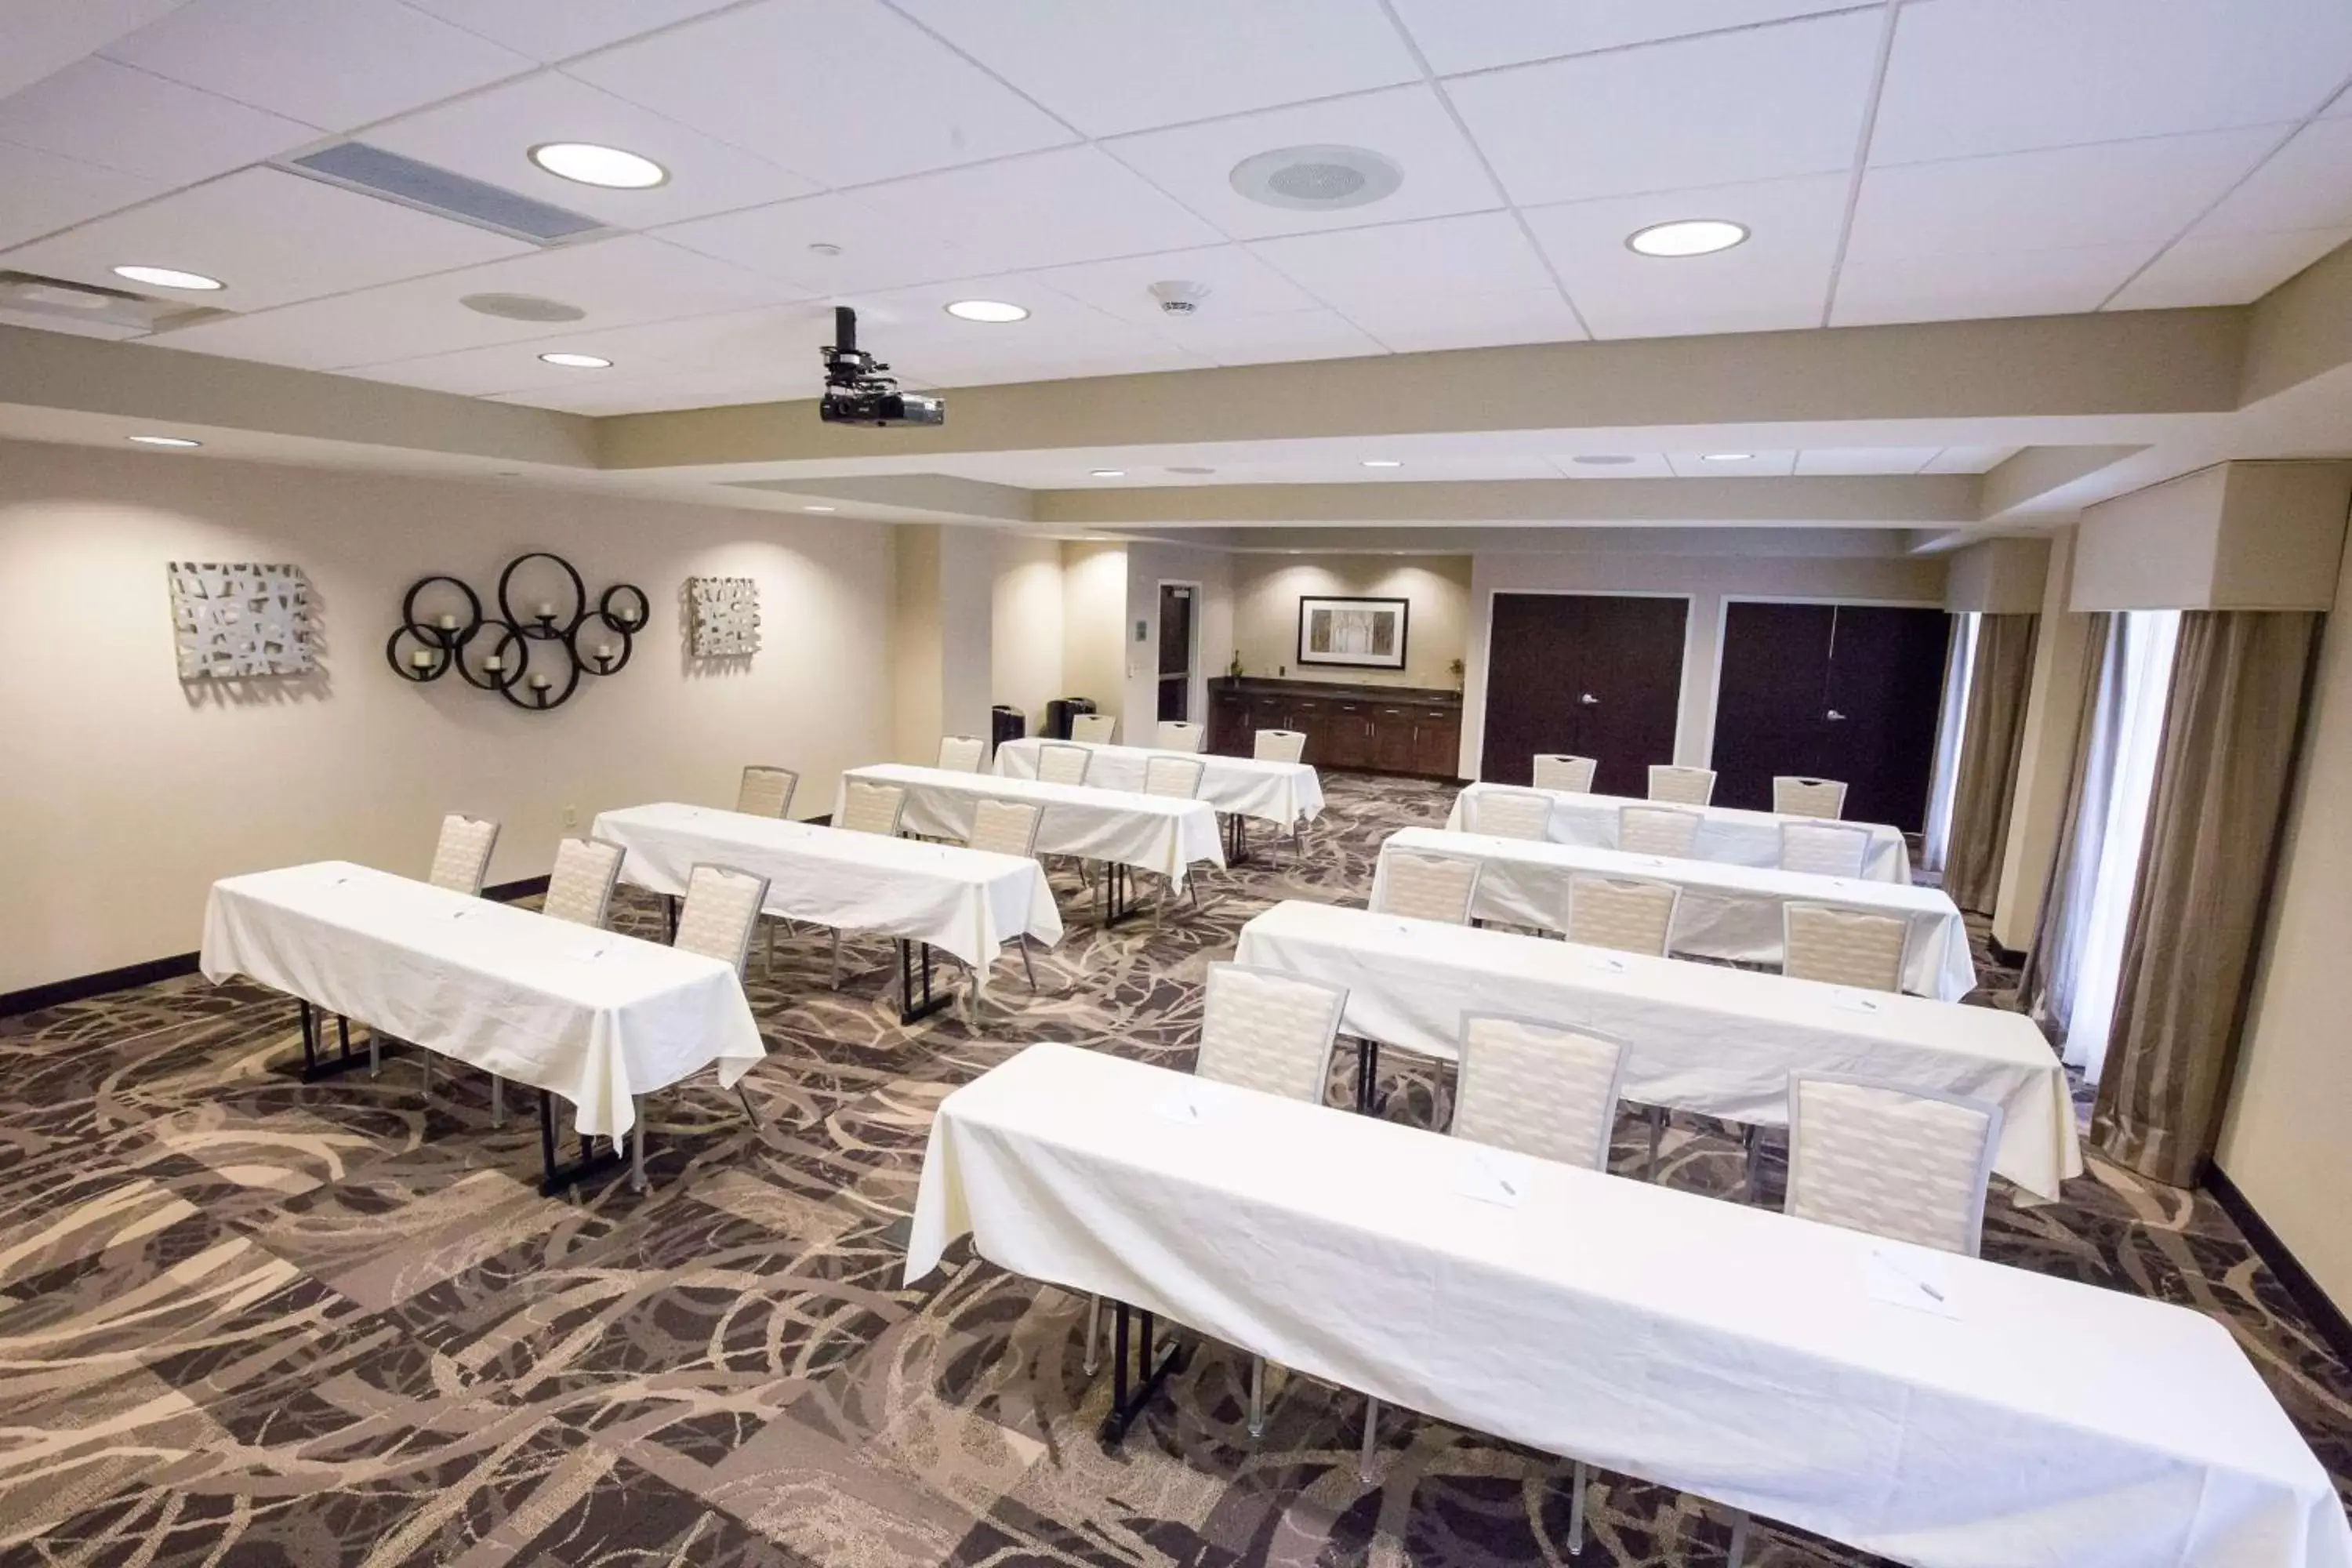 Meeting/conference room, Banquet Facilities in Hampton Inn & Suites - Pittsburgh/Harmarville, PA